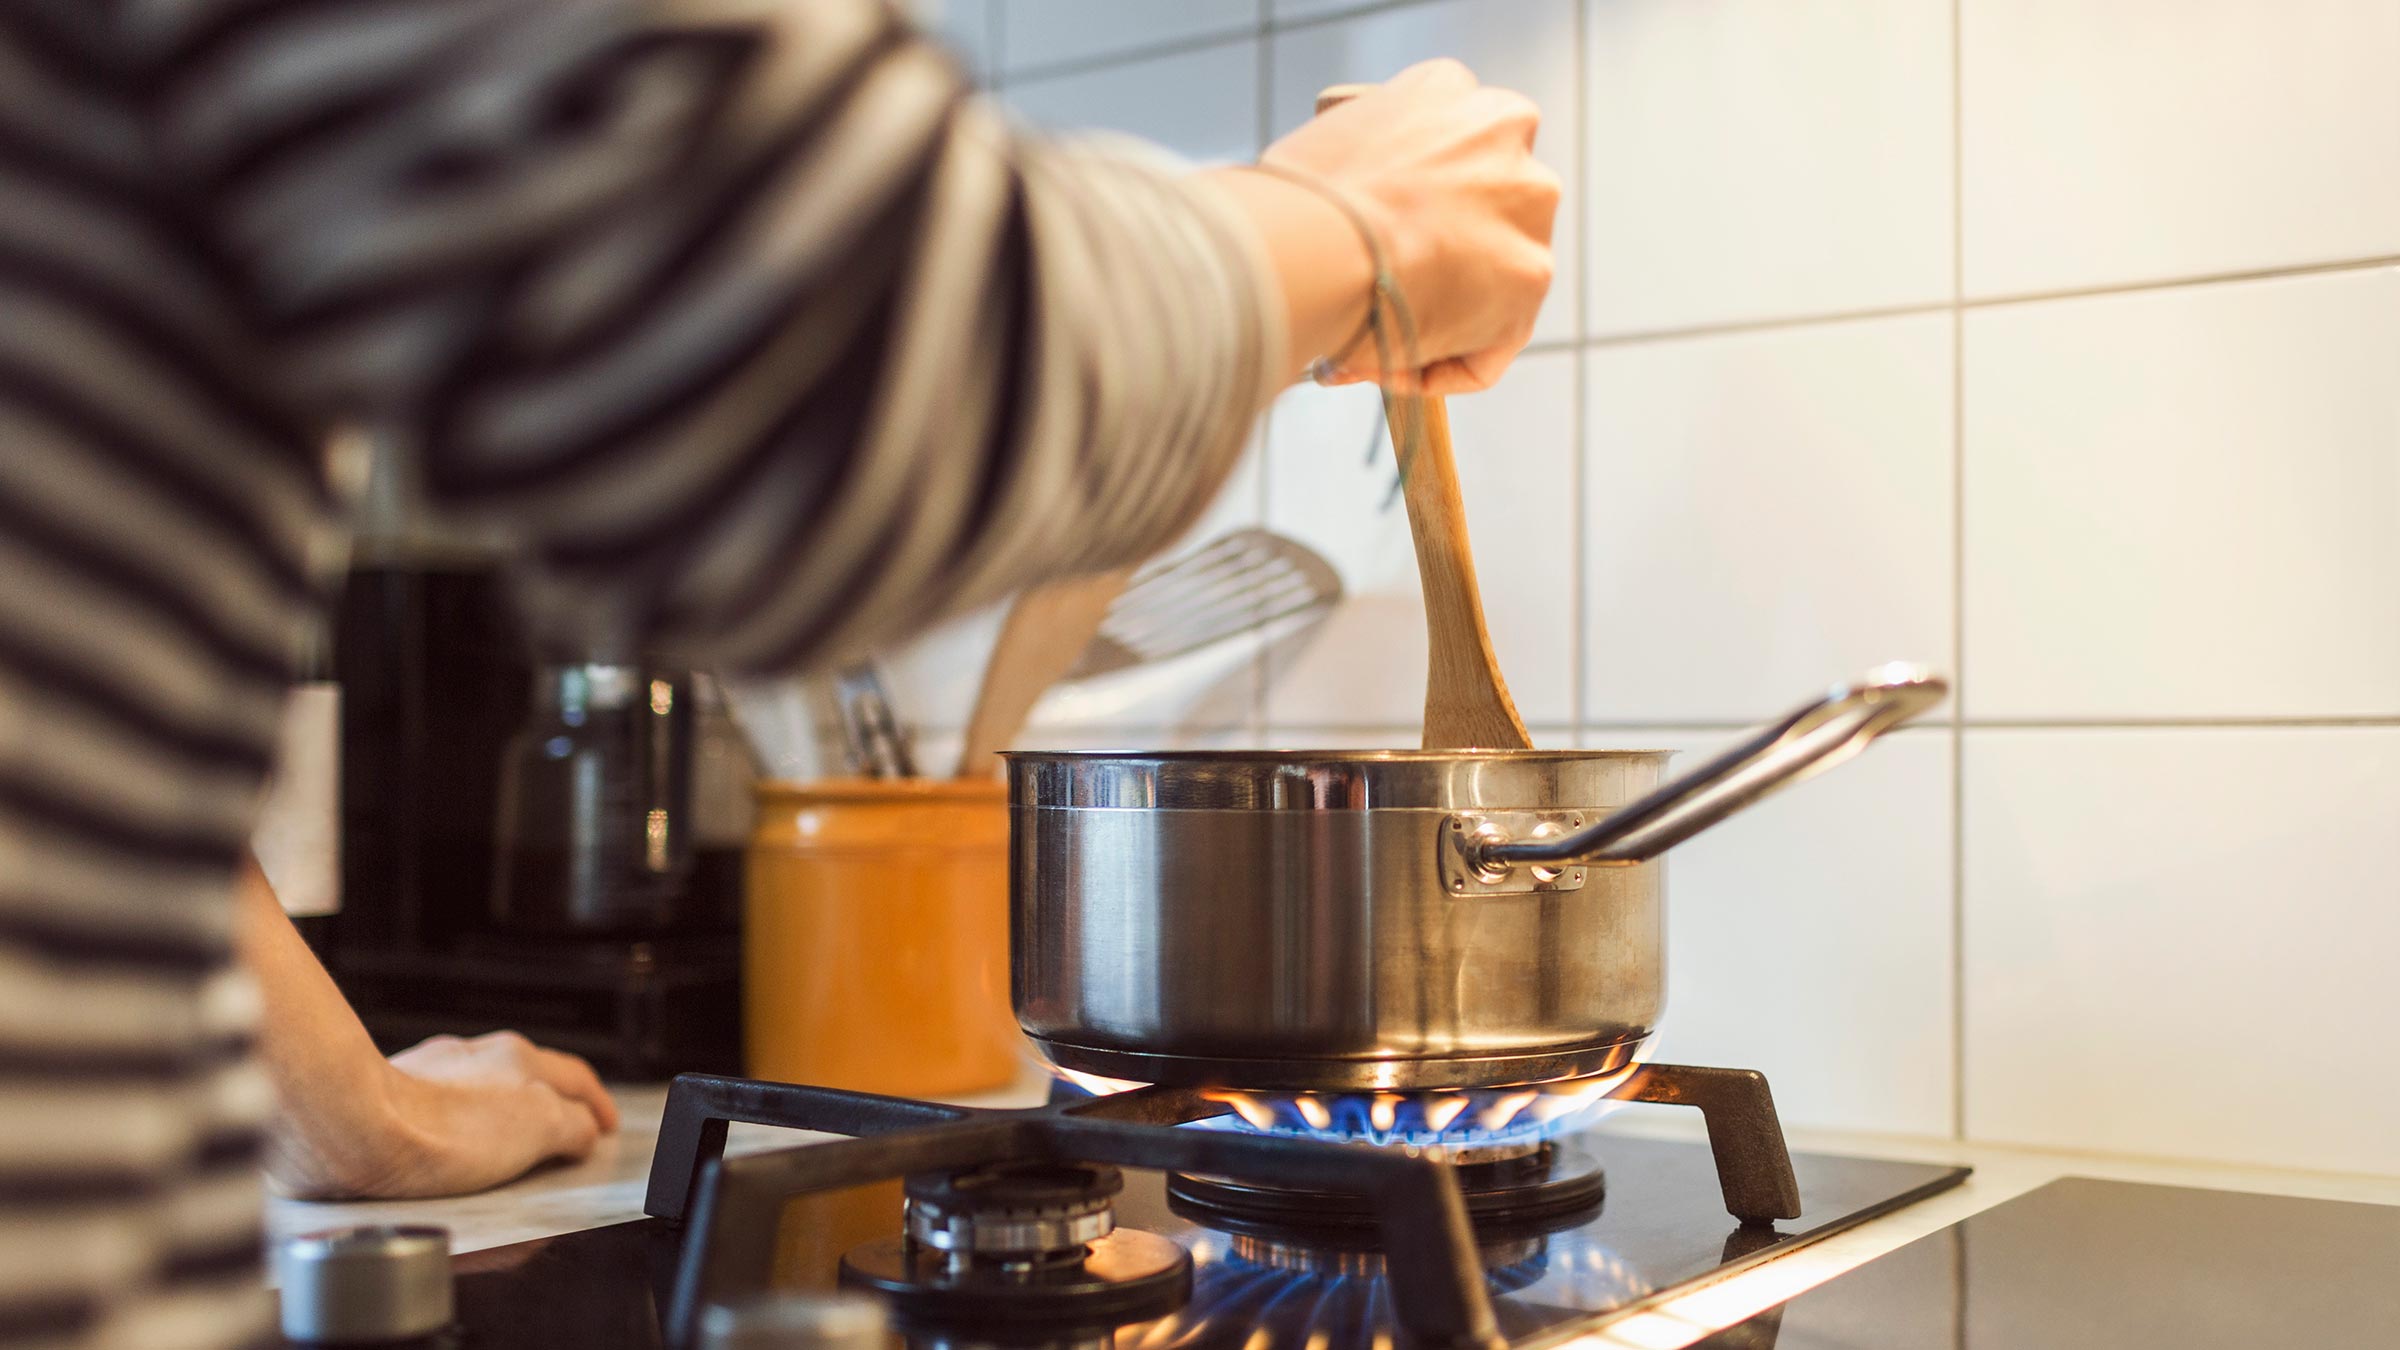 Why It's Better To Use The Back Burners On Your Stove, According To Science